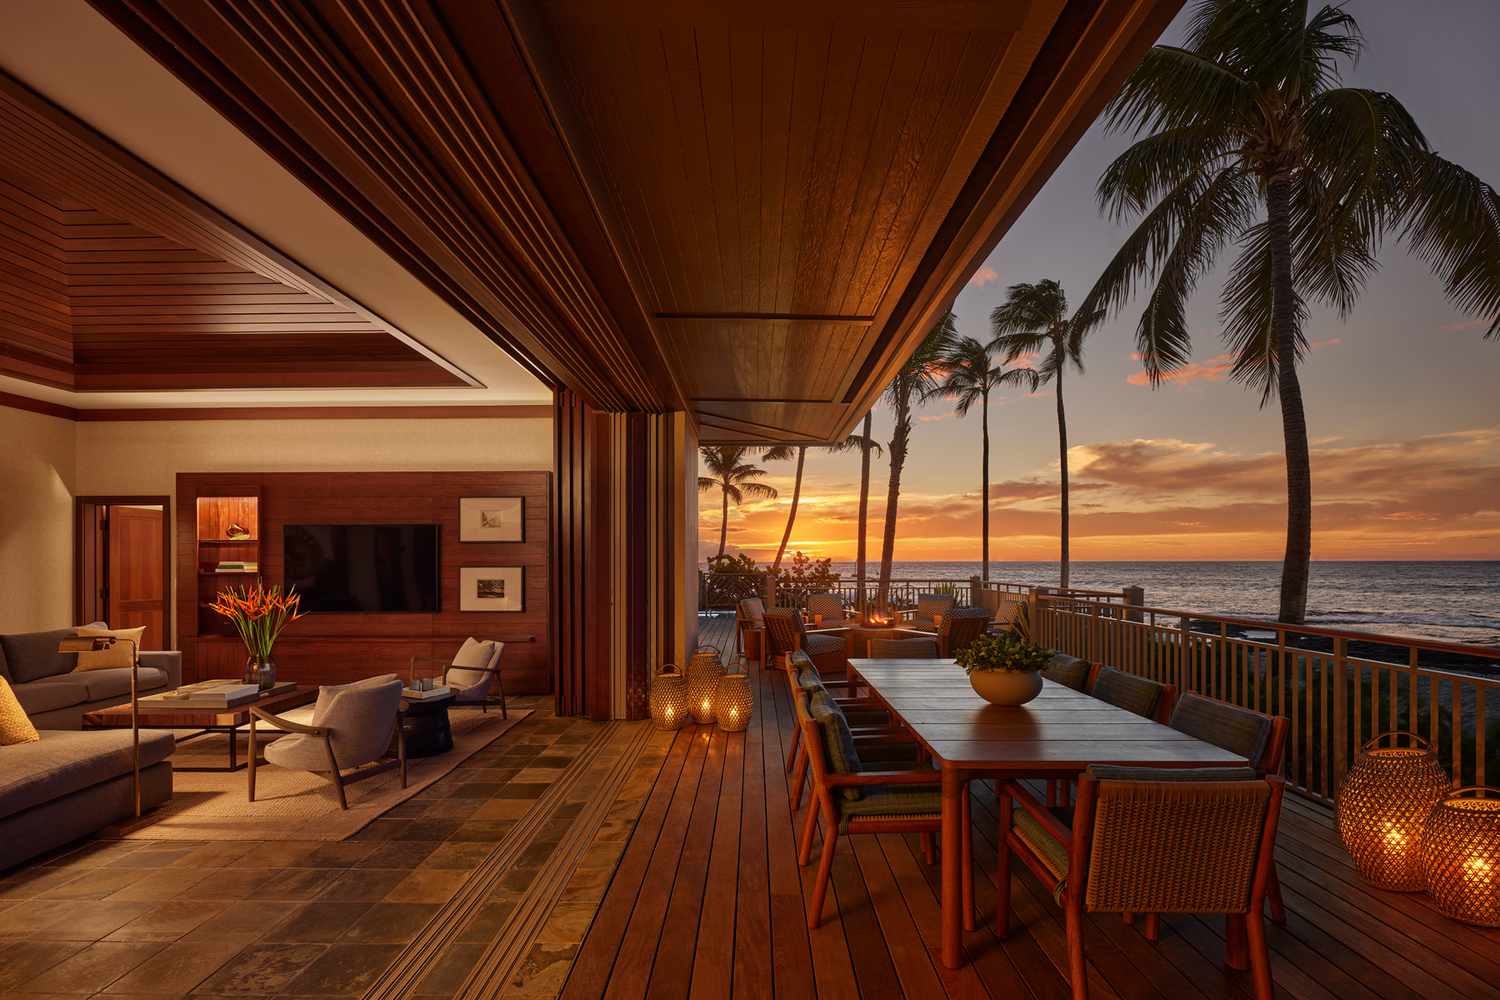 This Iconic Four Seasons Resort in Hawaii Just Debuted Stunning New Villas for a Next-level Escape